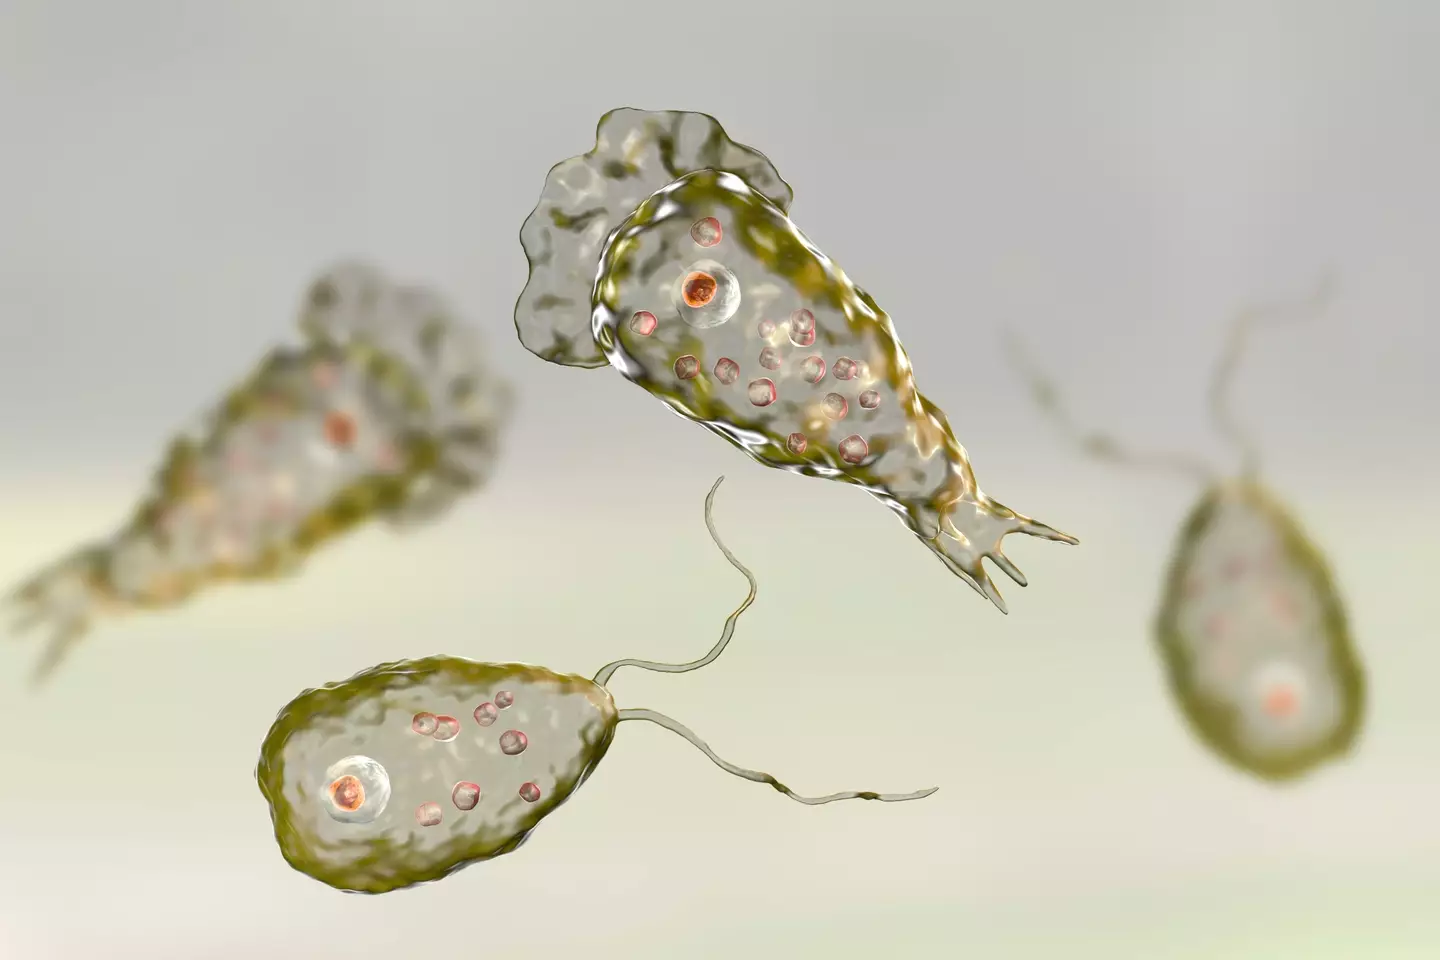 Naegleria fowleri are single-celled organisms that live in warm, fresh water.